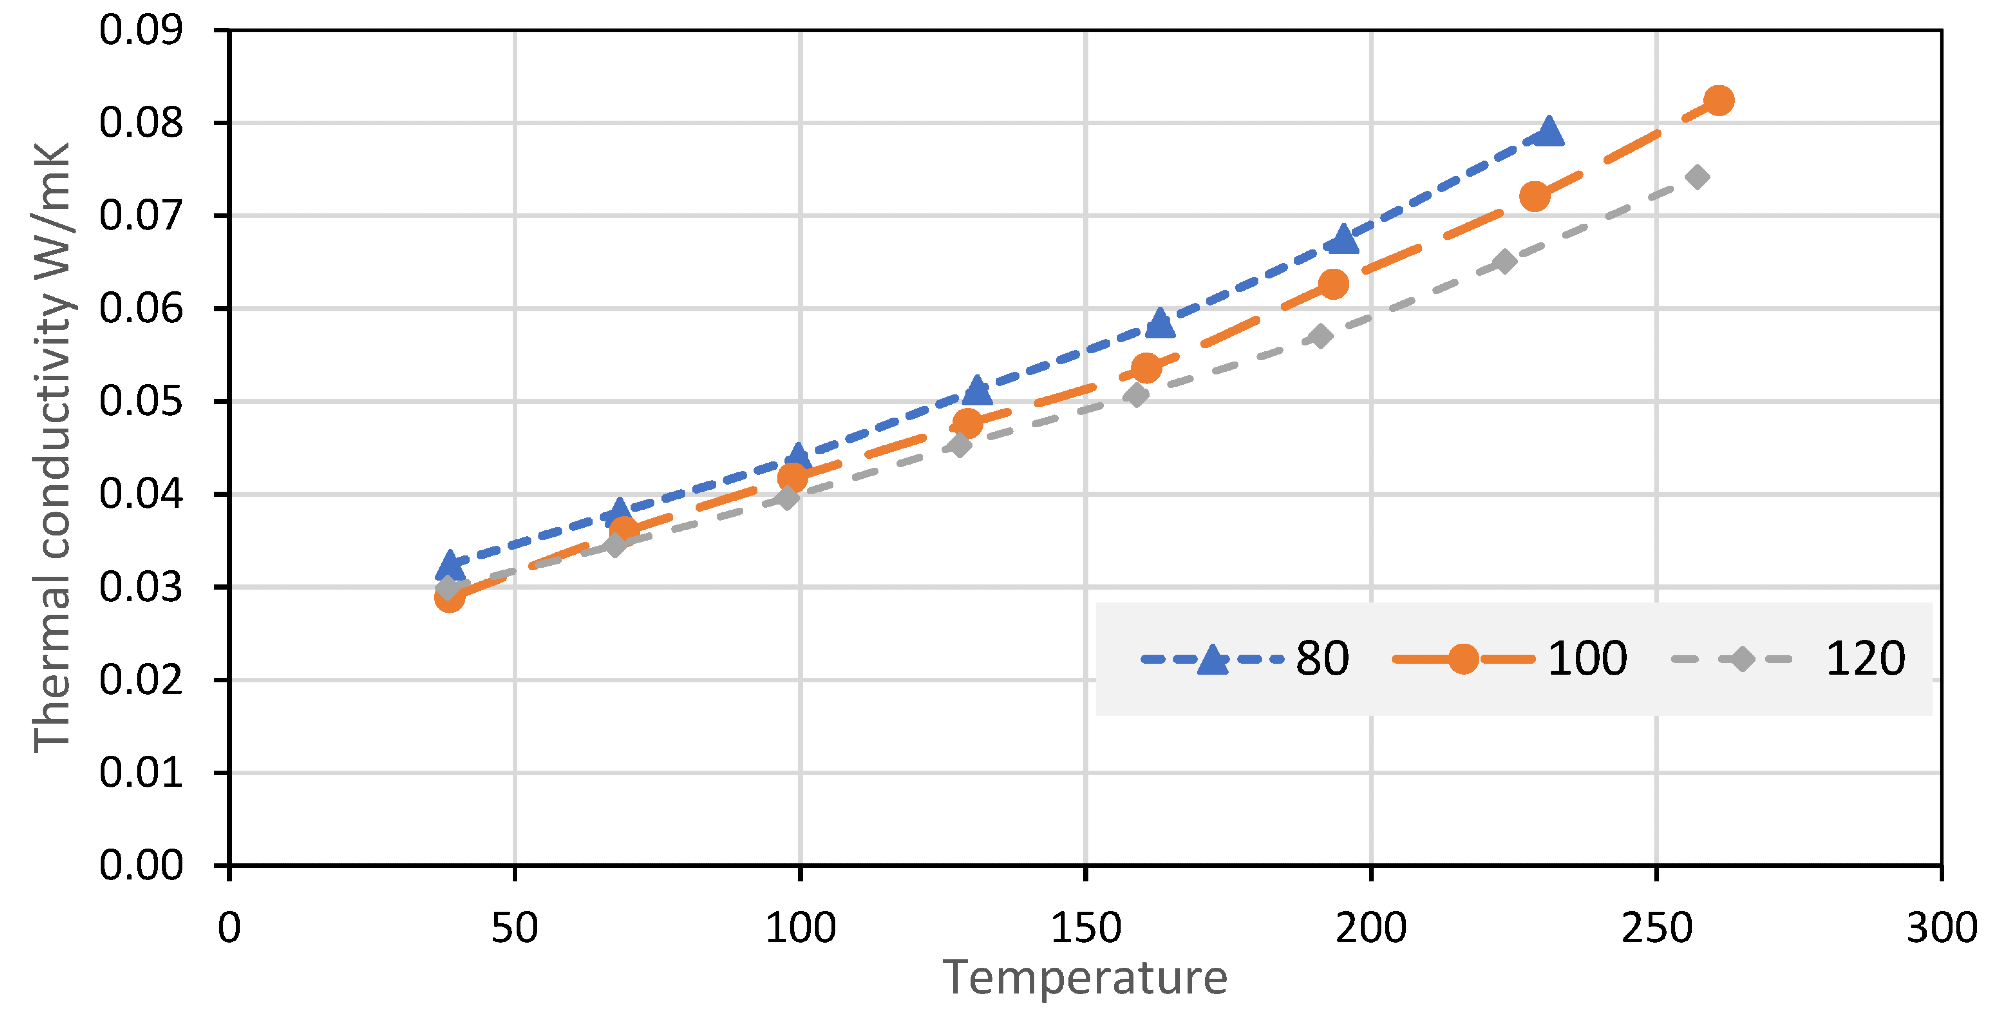 Dependence of the thermal conductivity coefficient (W/m°C) from the temperature (°C) for materials with densities of 80, 100, and 120 kg/m3